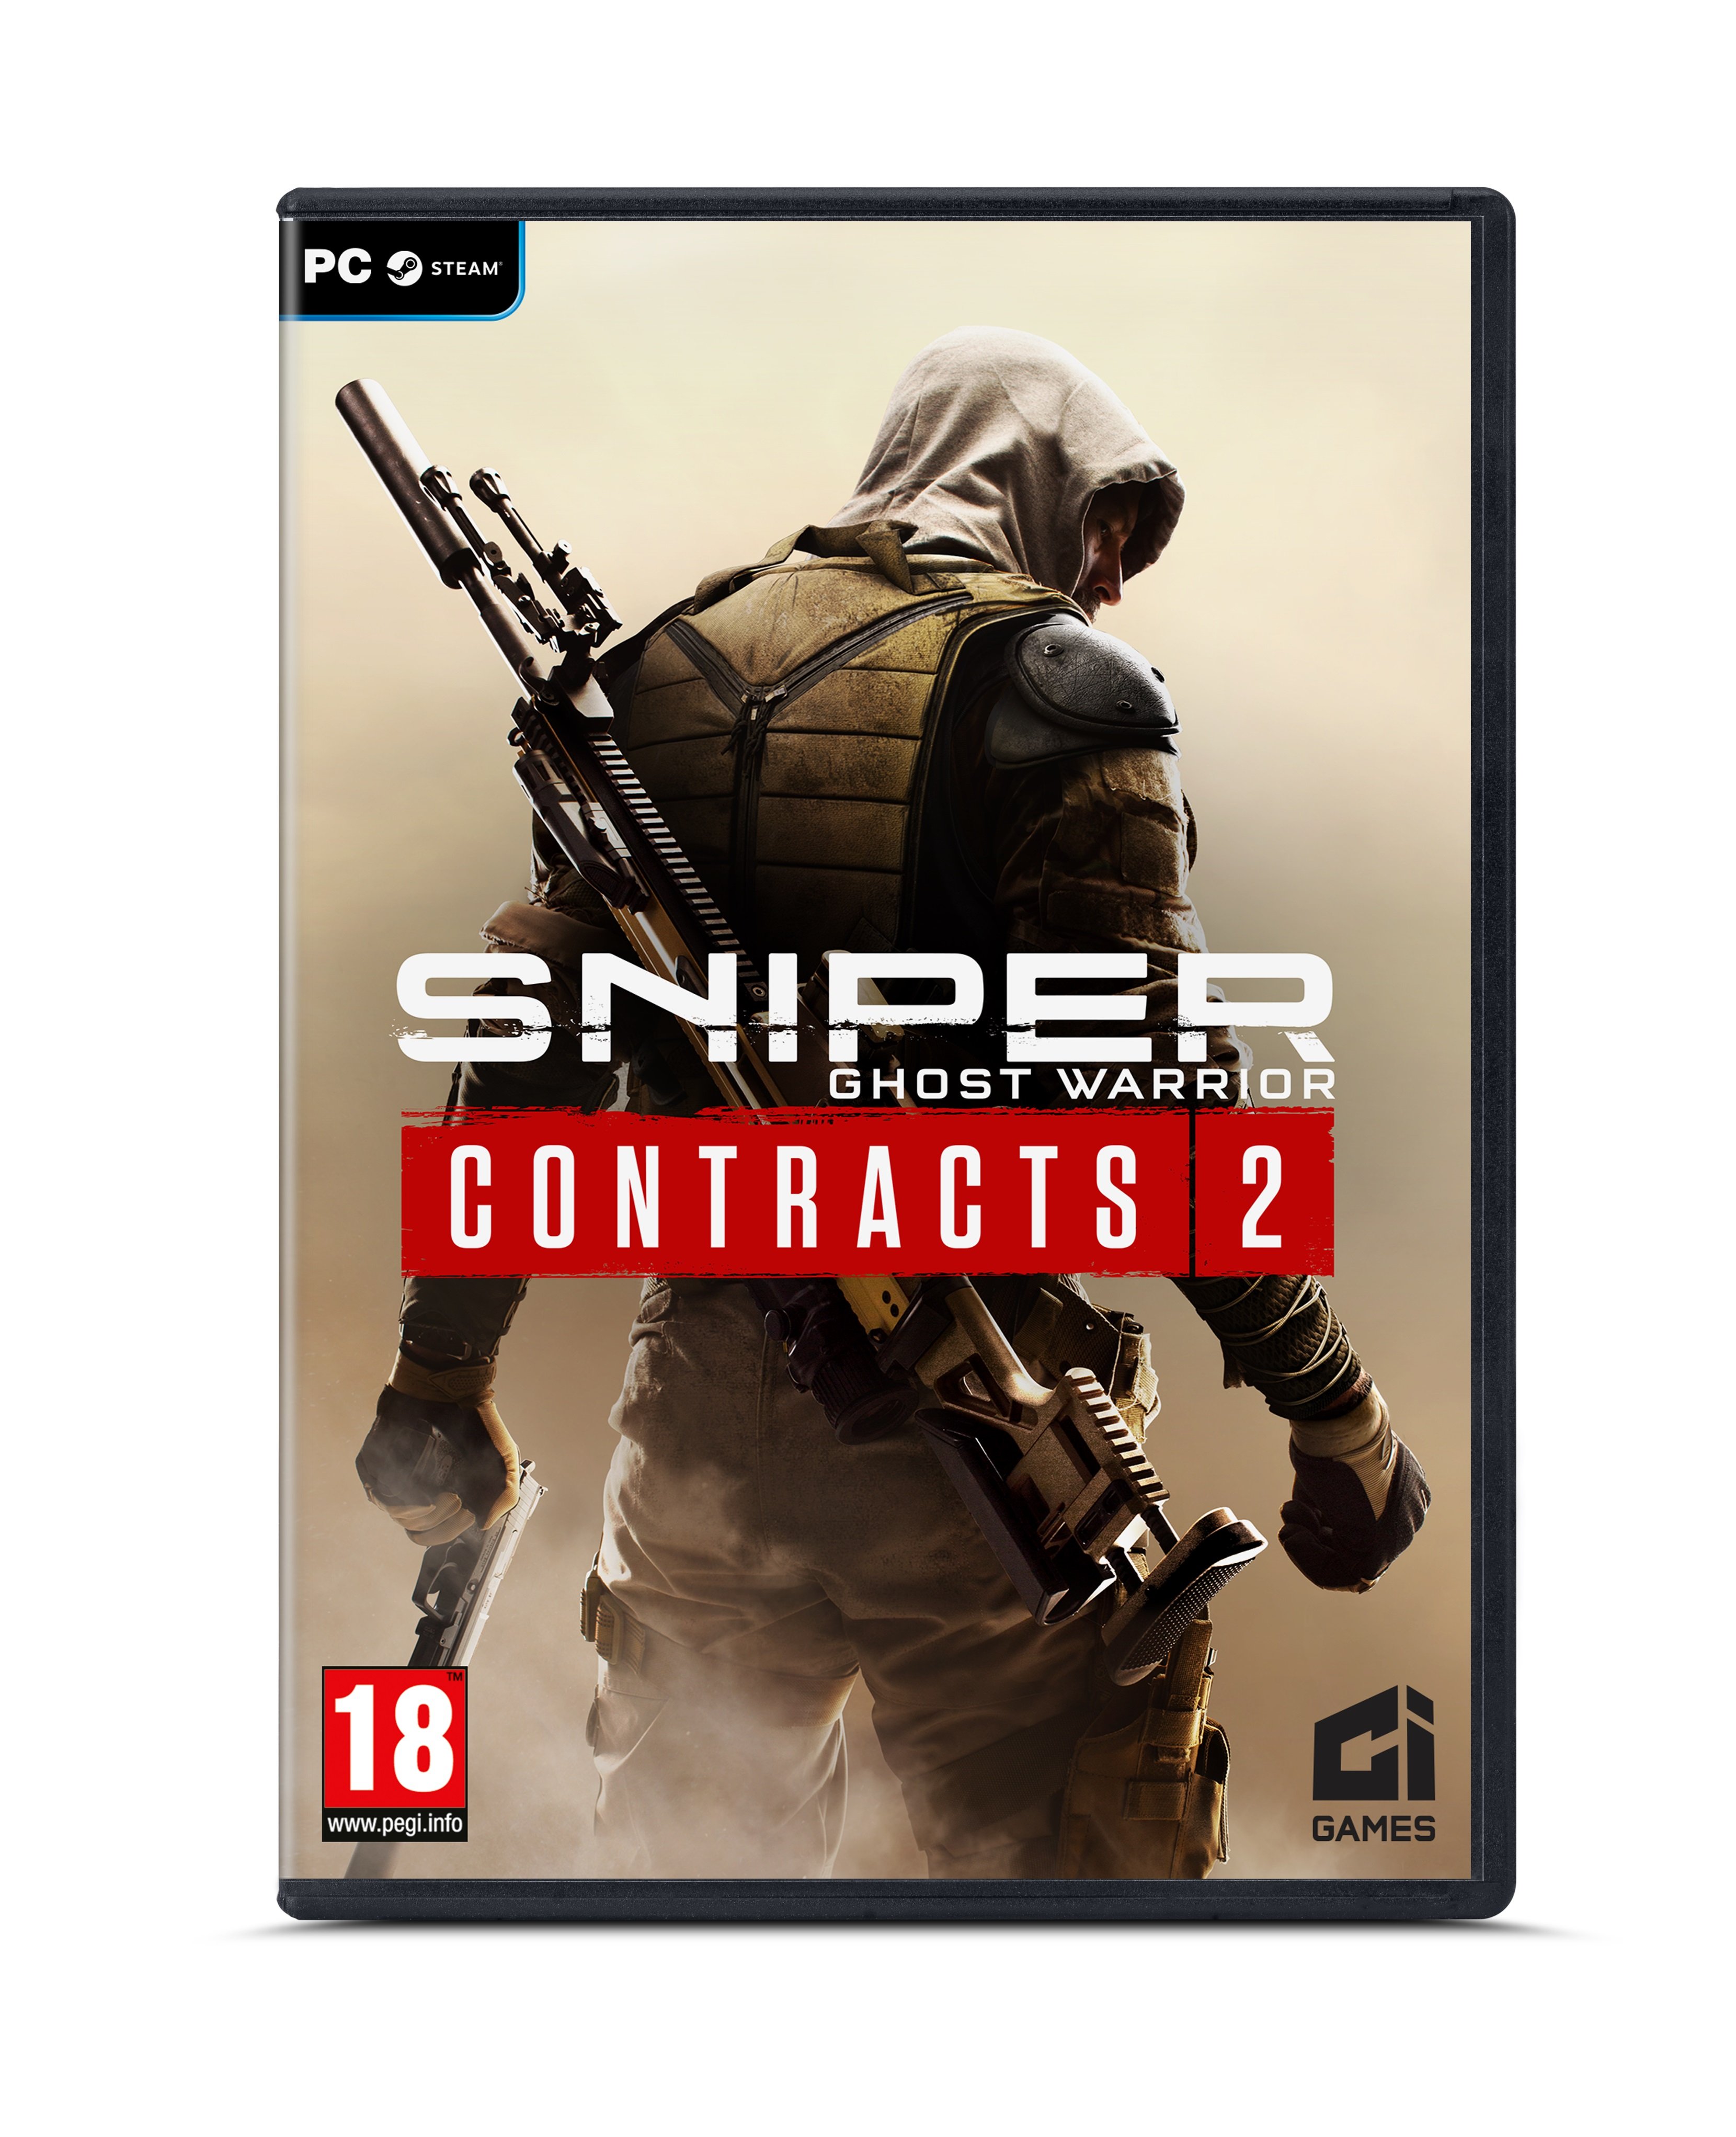 ghost sniper warrior contracts 2 download